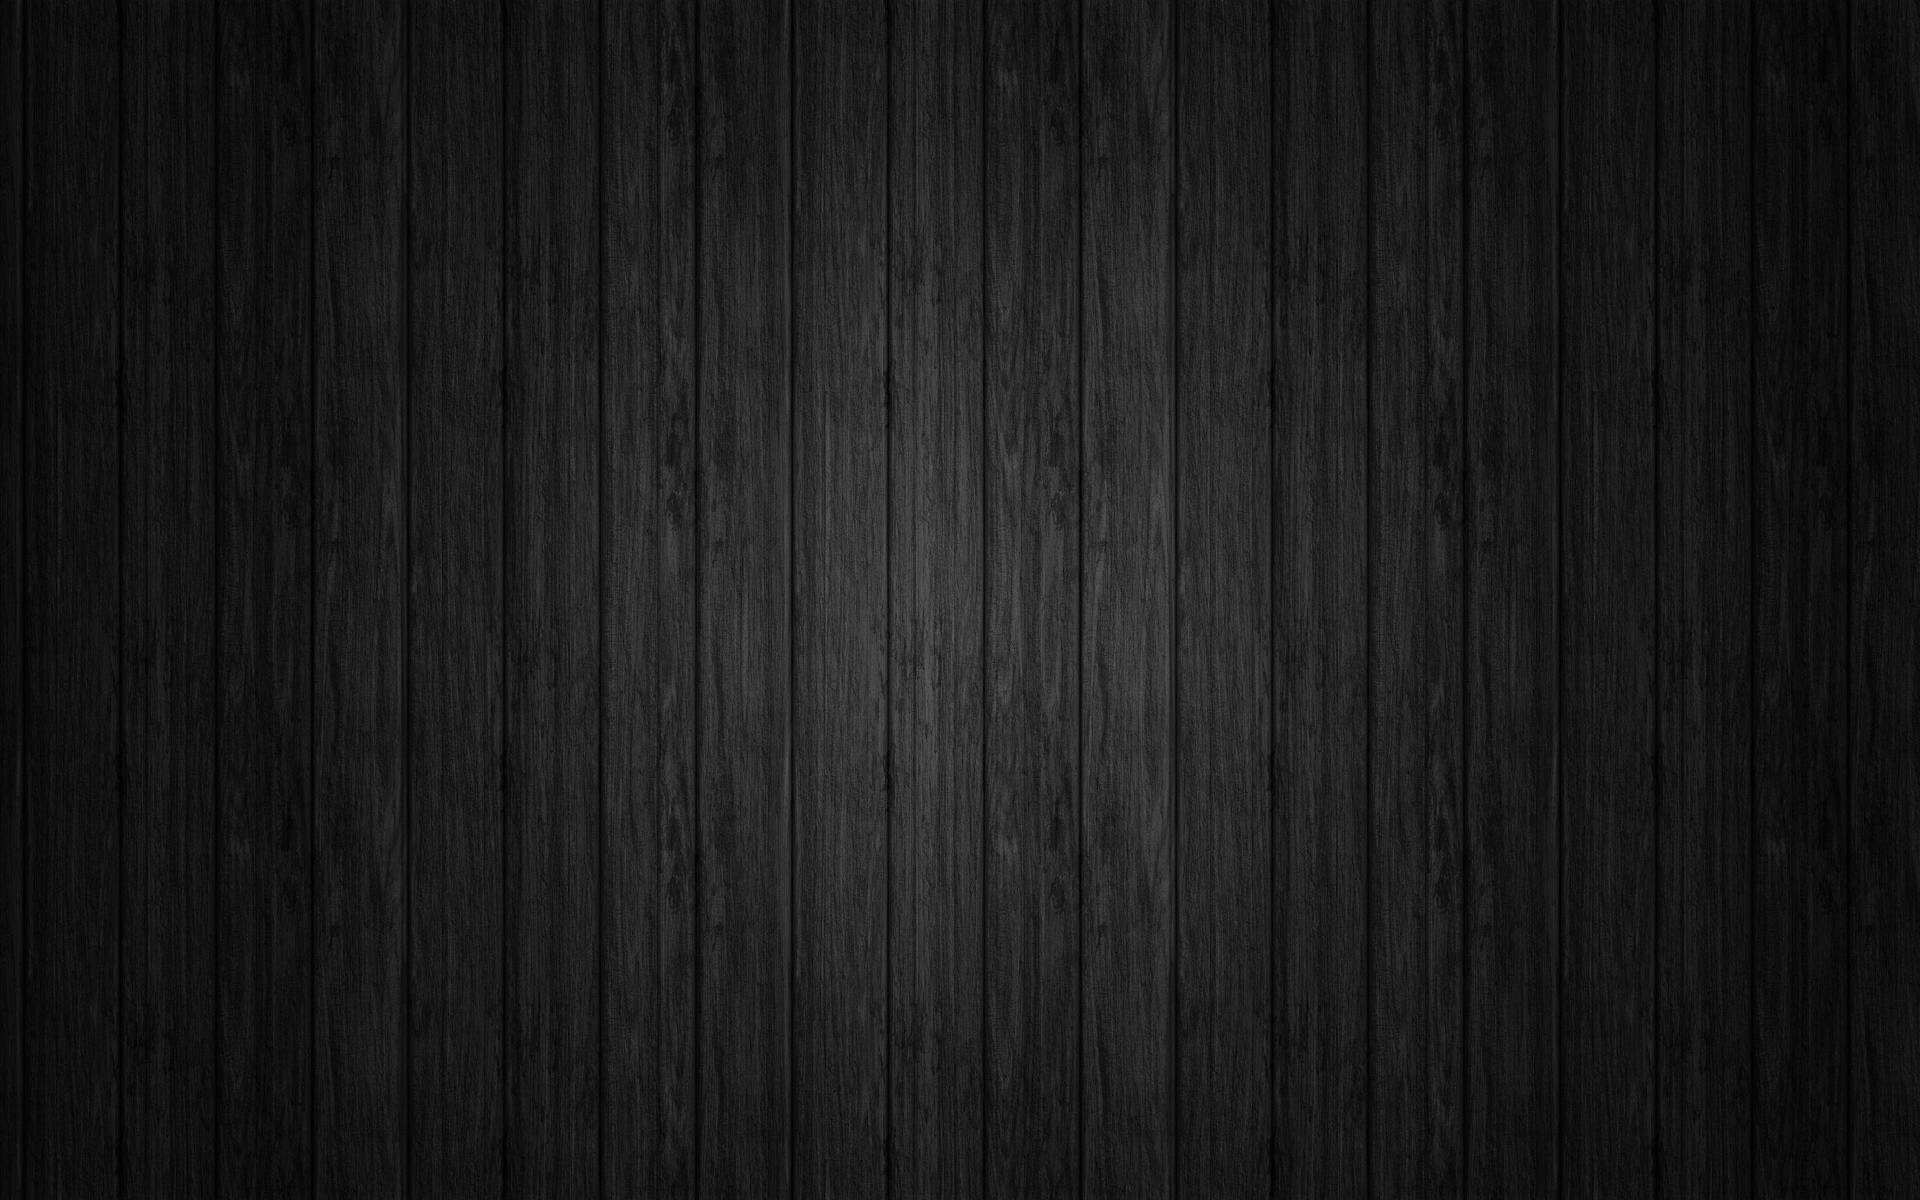 Plain Black With Wooden Pattern